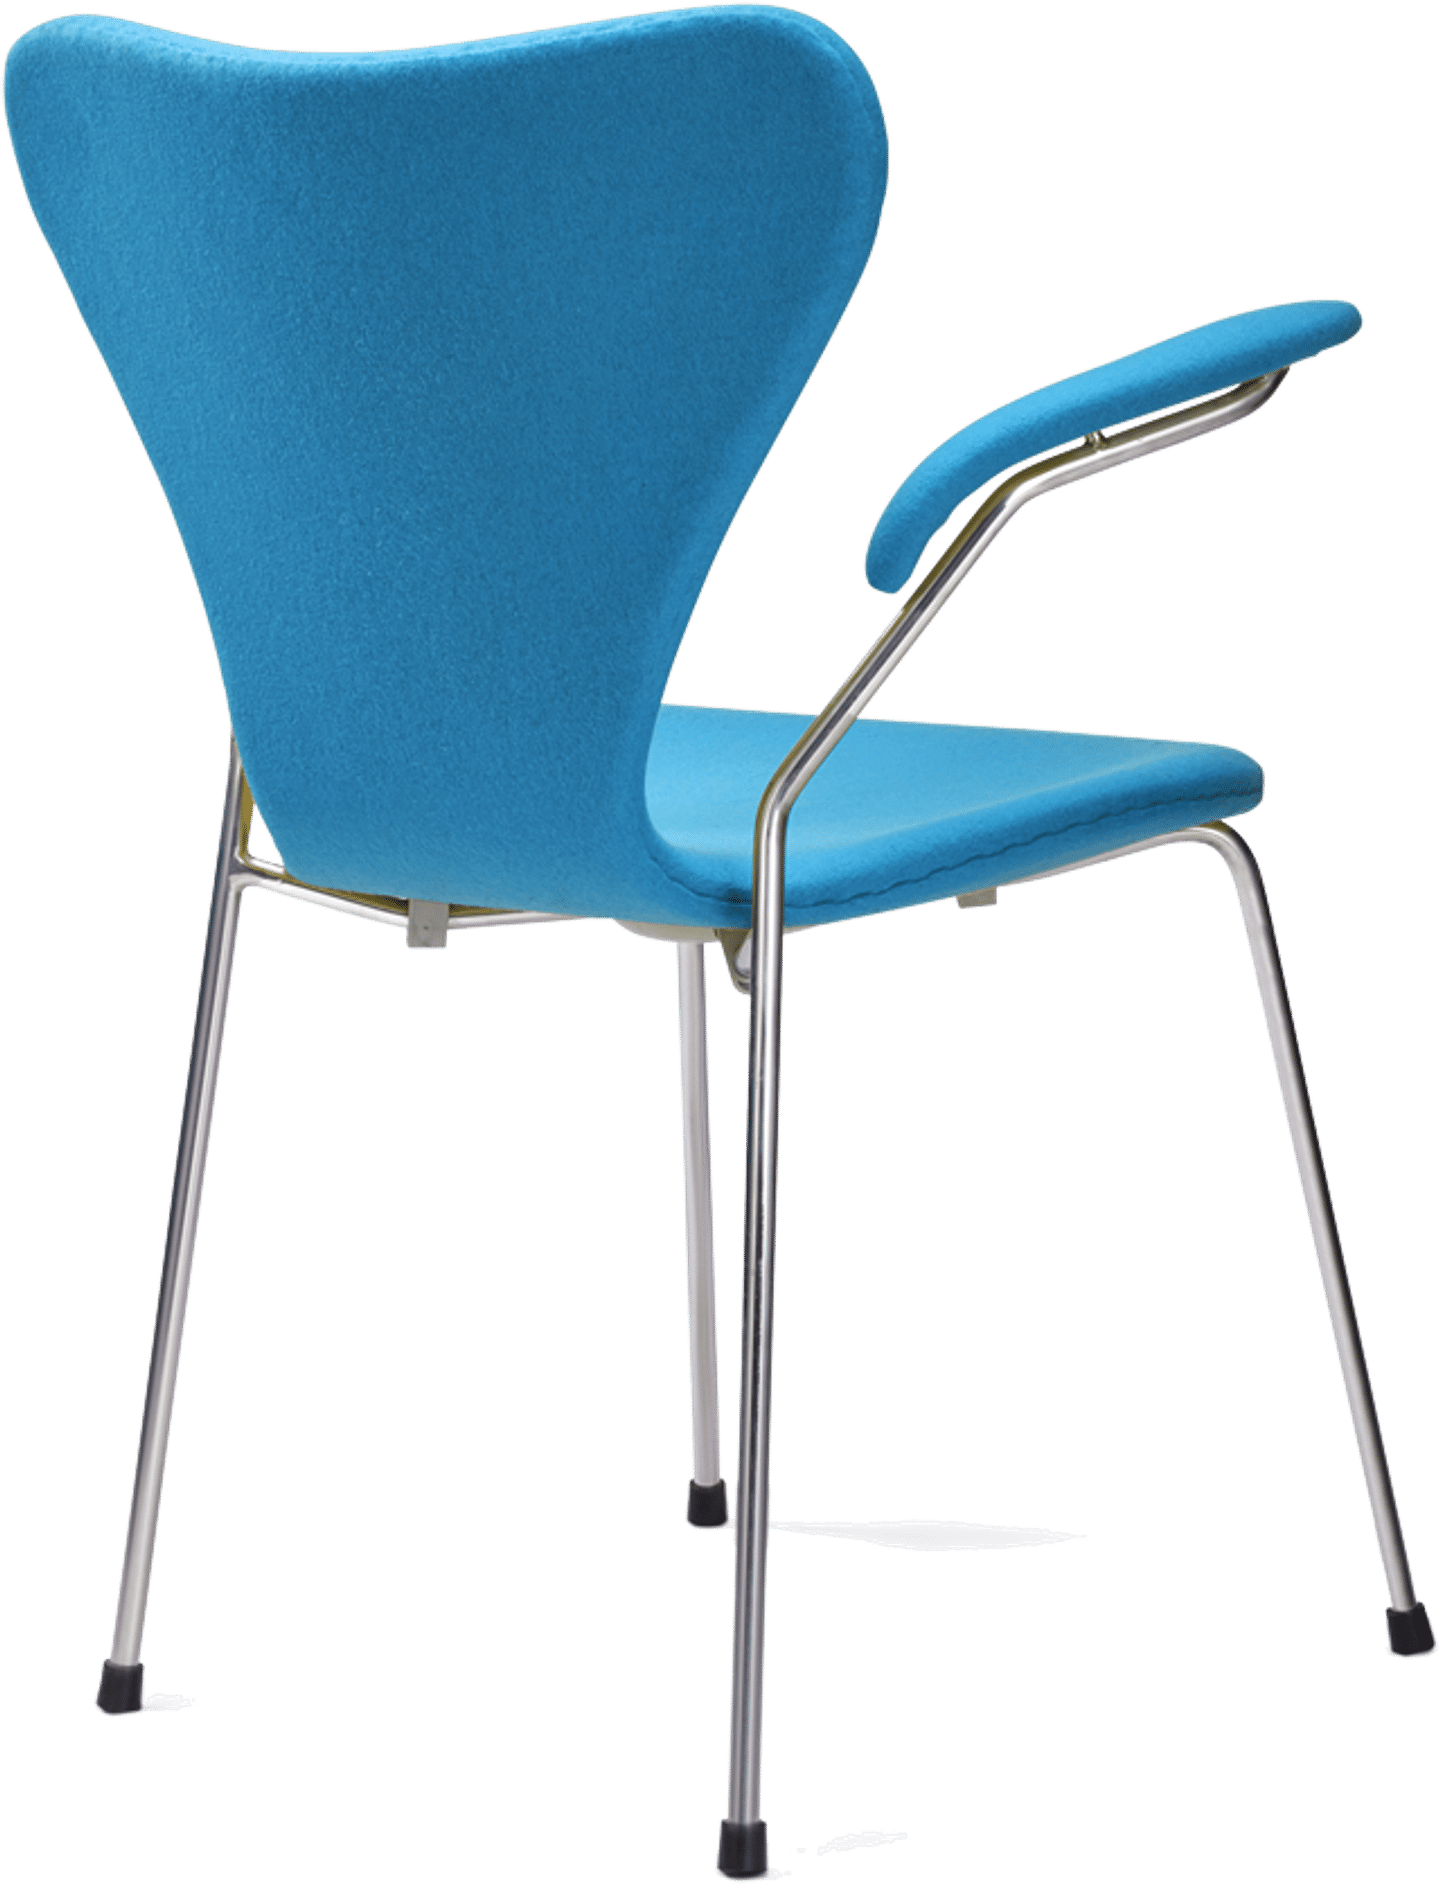 Serie 7 Chair Carver Moroccan Blue image.